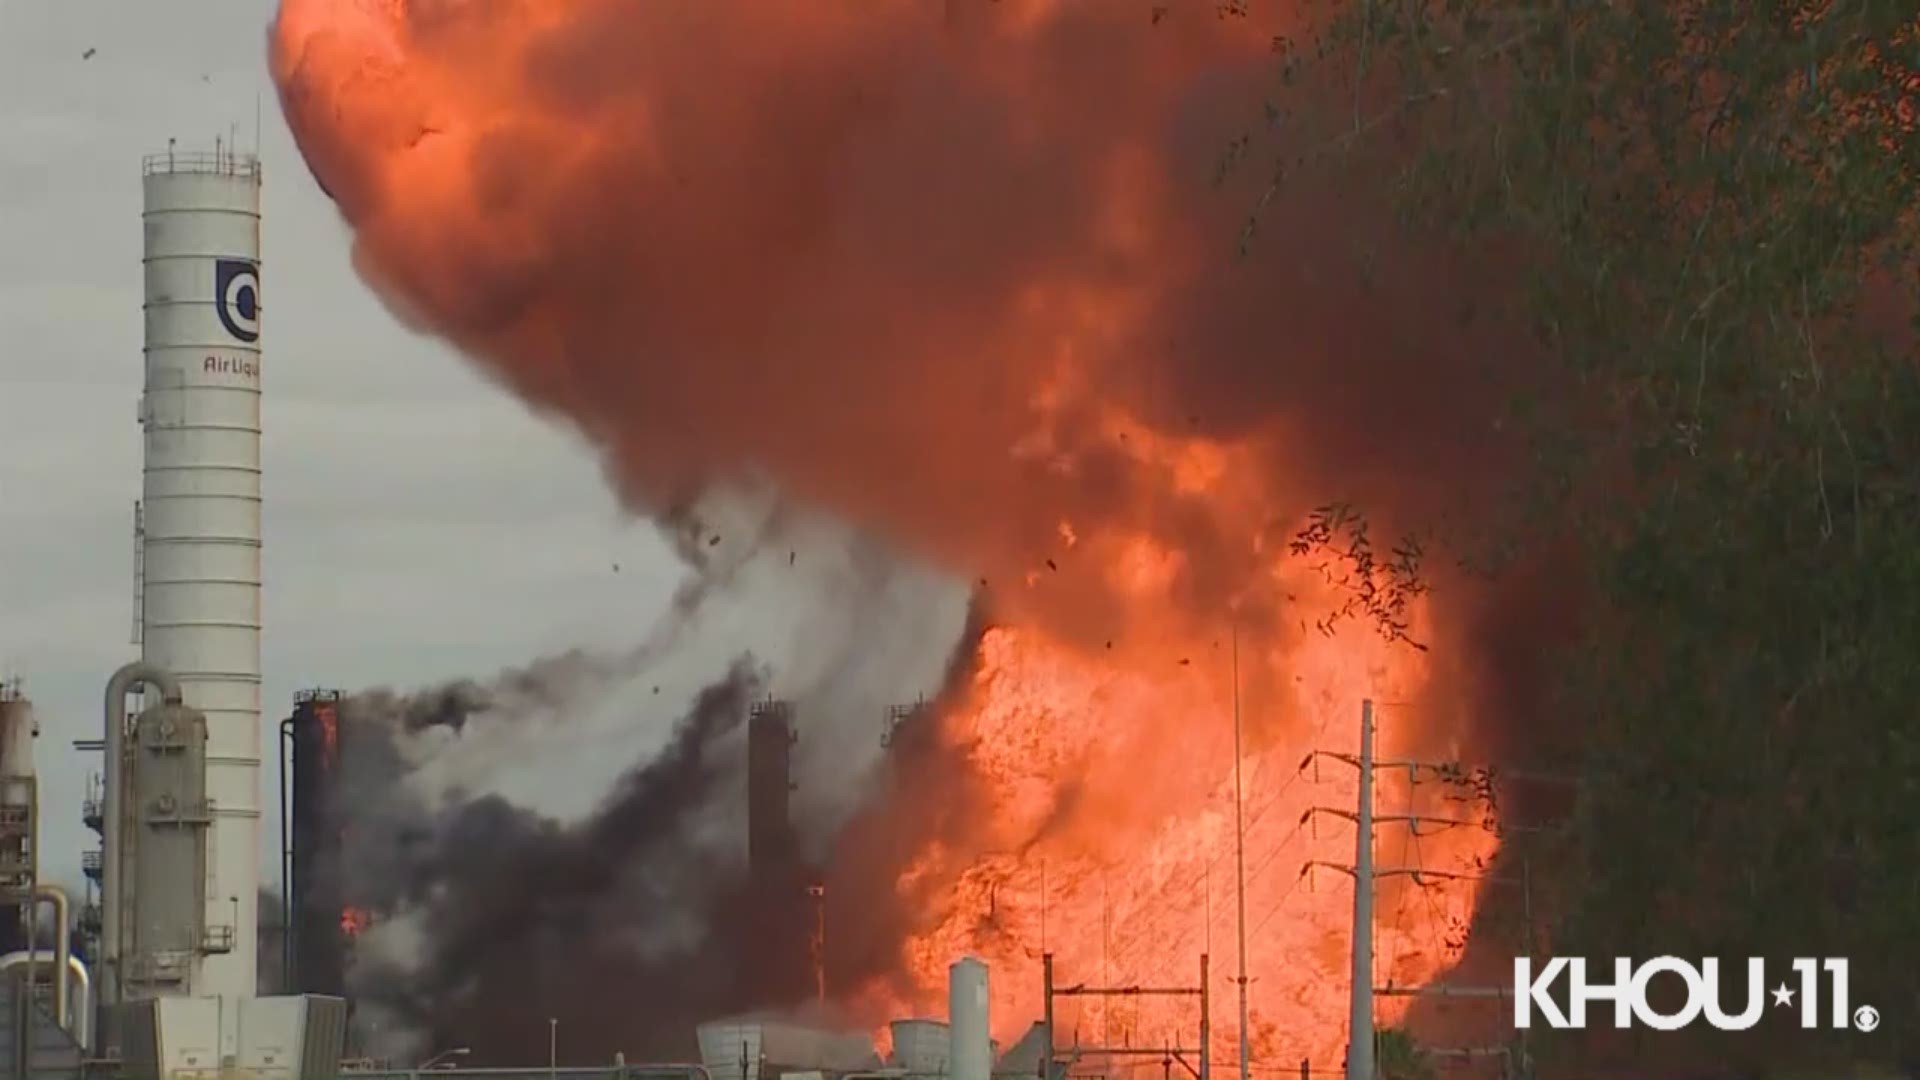 Watch 2nd major explosion rocks Port Neches plant in Texas khou